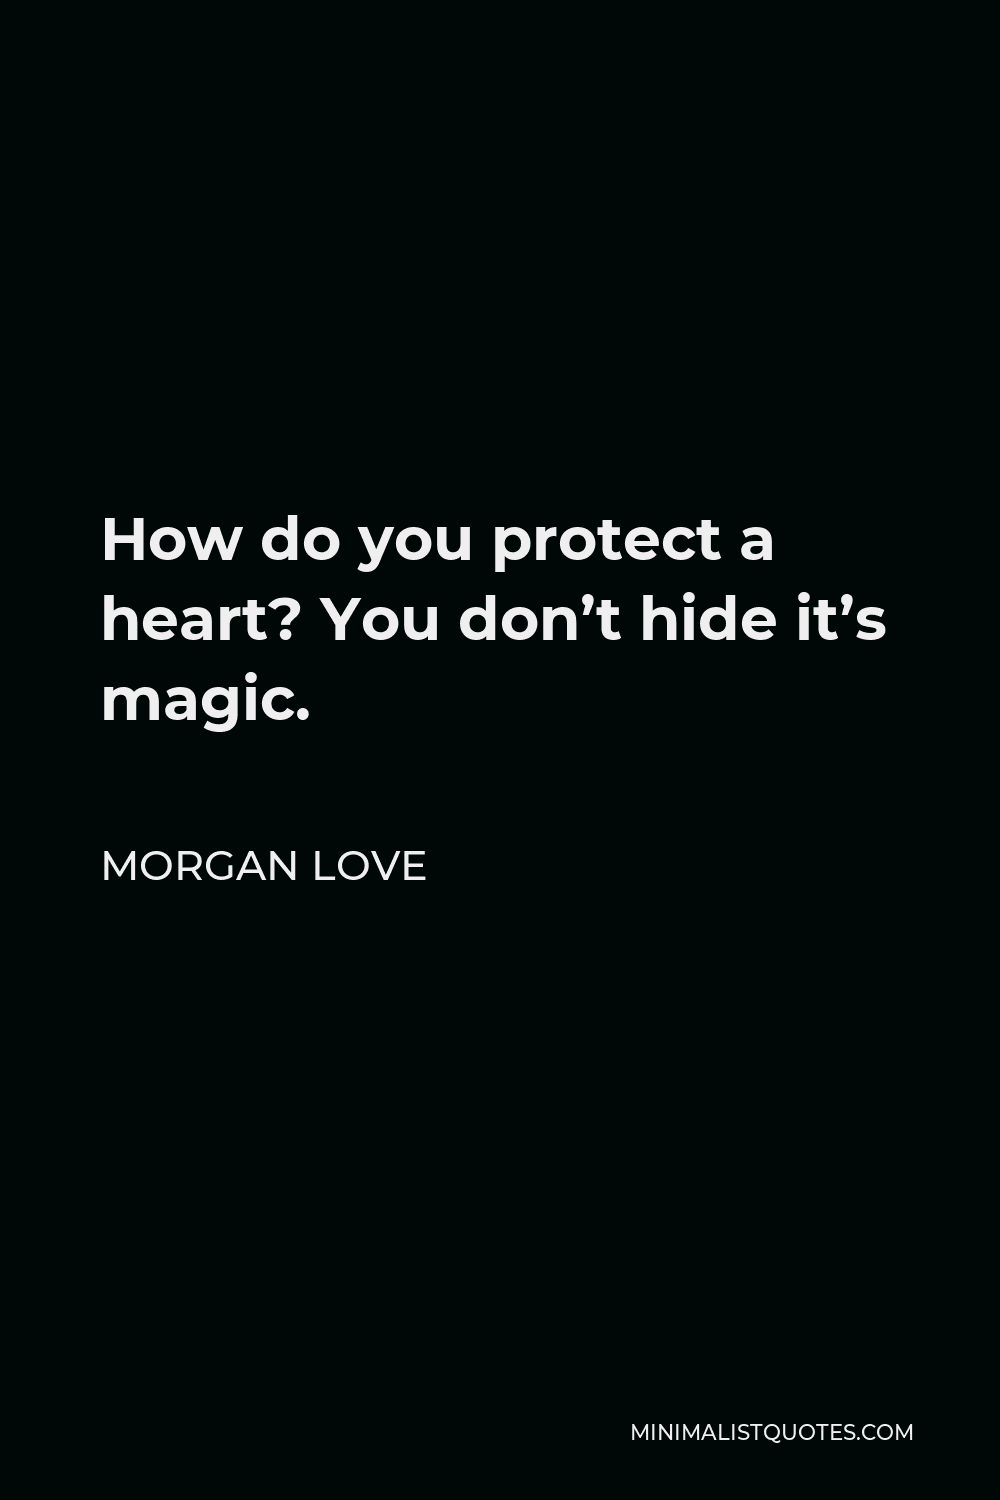 Morgan Love Quote - How do you protect a heart? You don’t hide it’s magic.